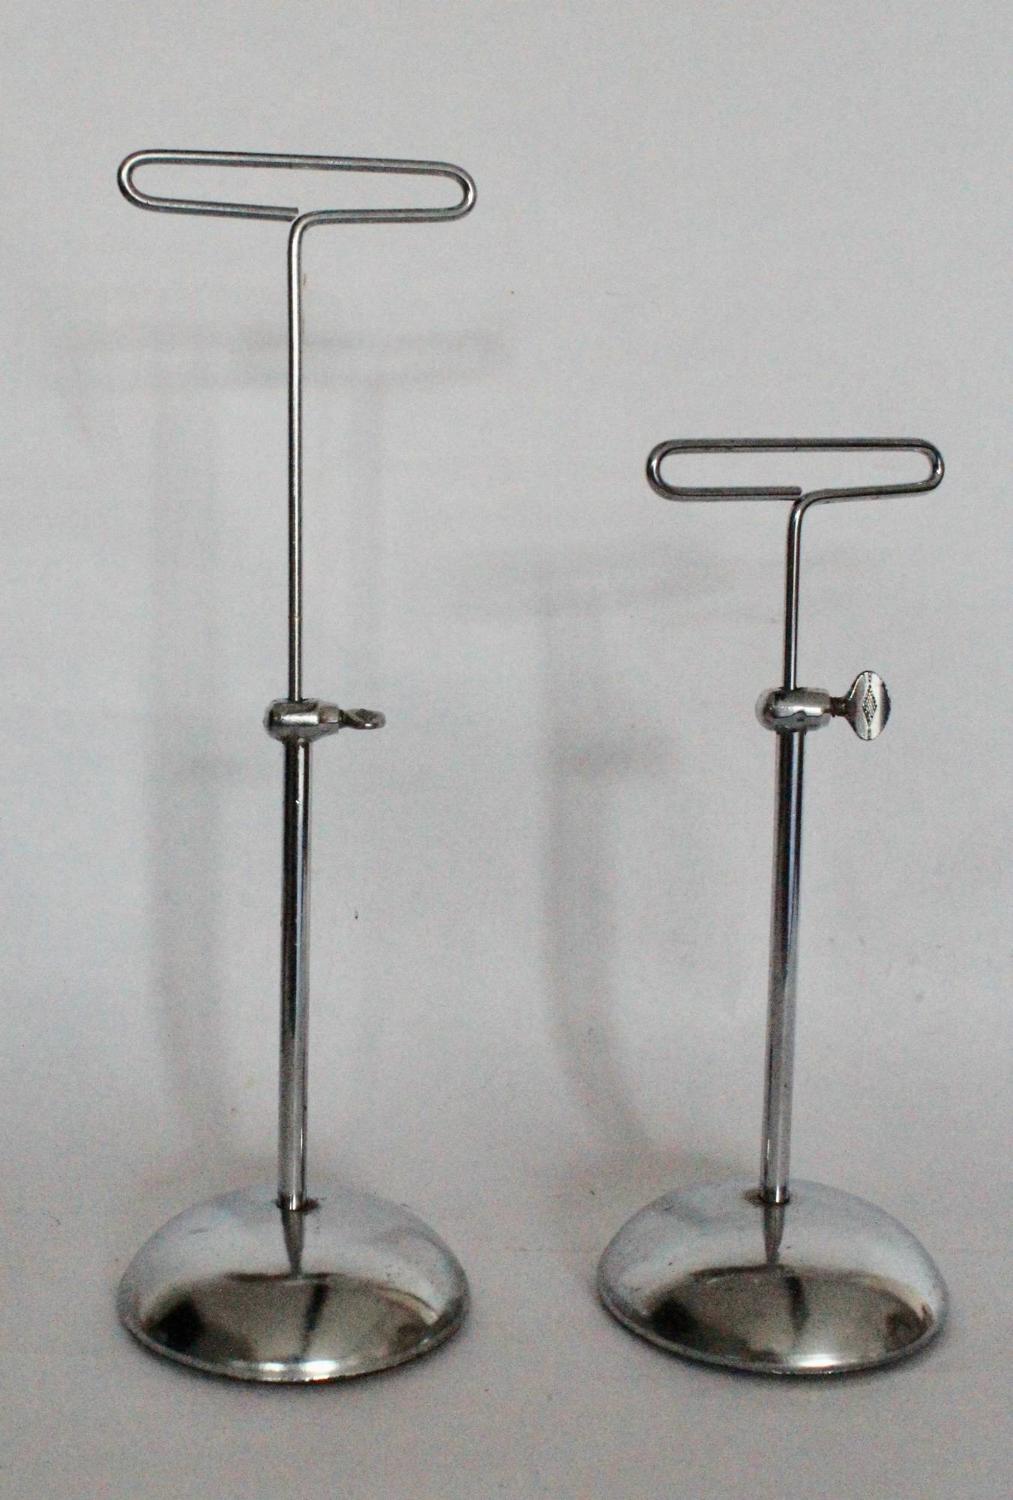 Pair of Telescopic Chrome Shop Display Stands